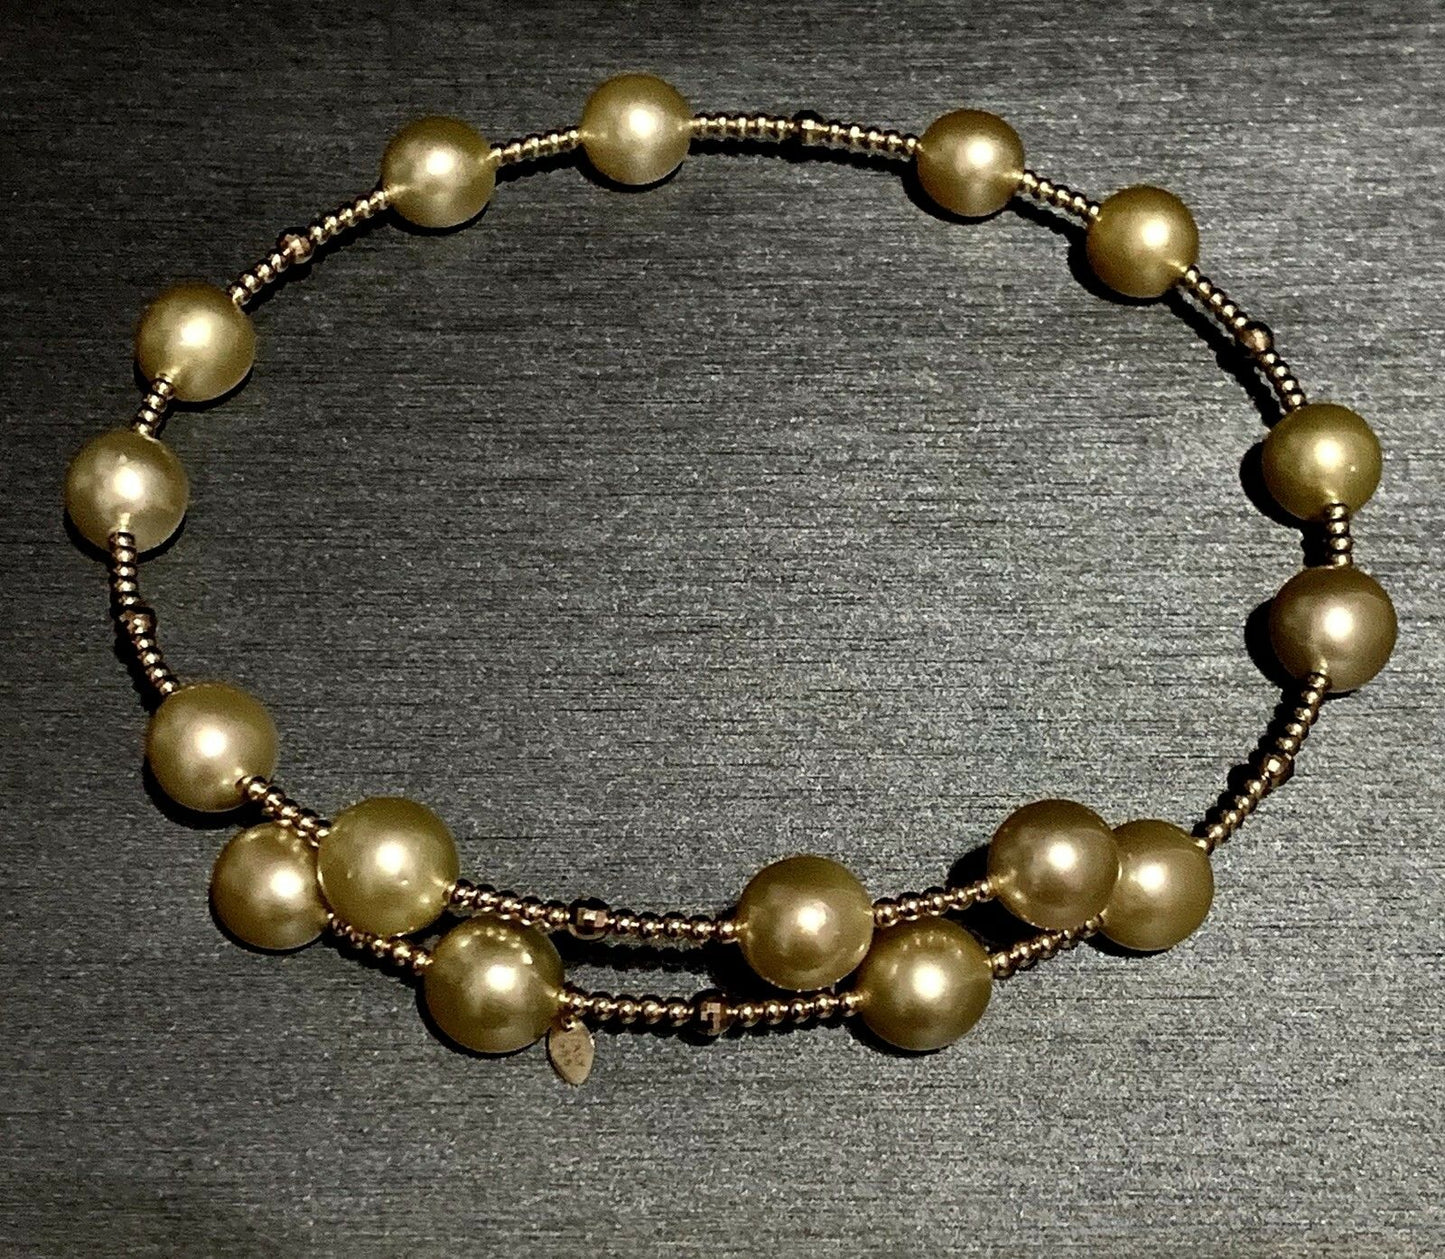 South Sea Pearl Choker Necklace 14k Gold 11.50 mm Italy Certified $3,450 820422 - Certified Estate Jewelry